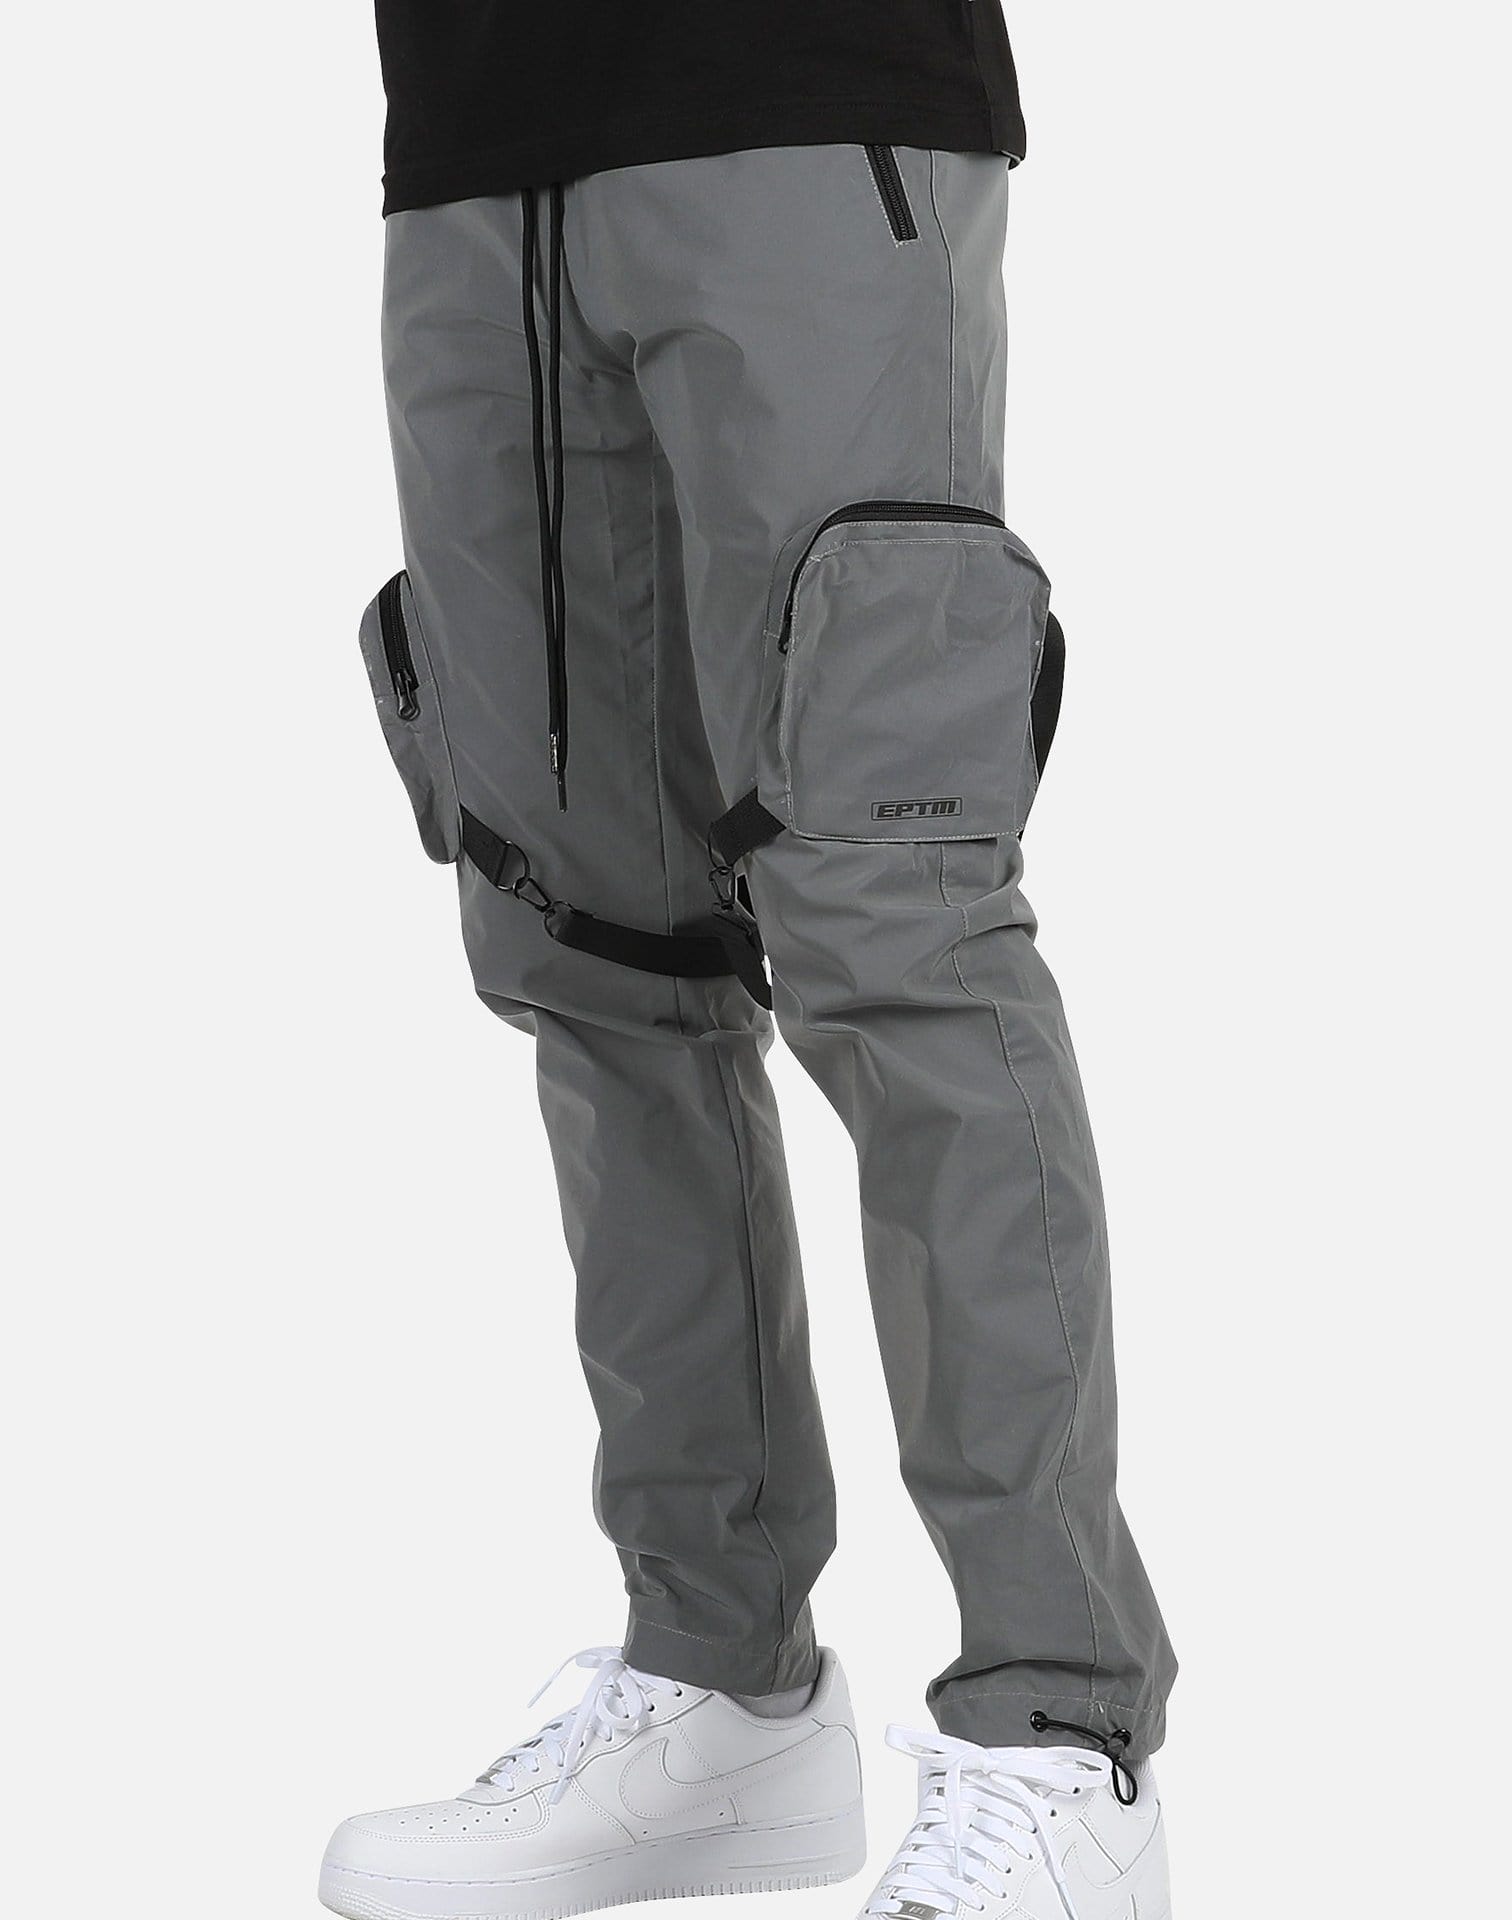 Buy 3824_Rothco Deluxe EMT (Emergency Medical Technician) Paramedic Pants -  Rothco Online at Best price - PR